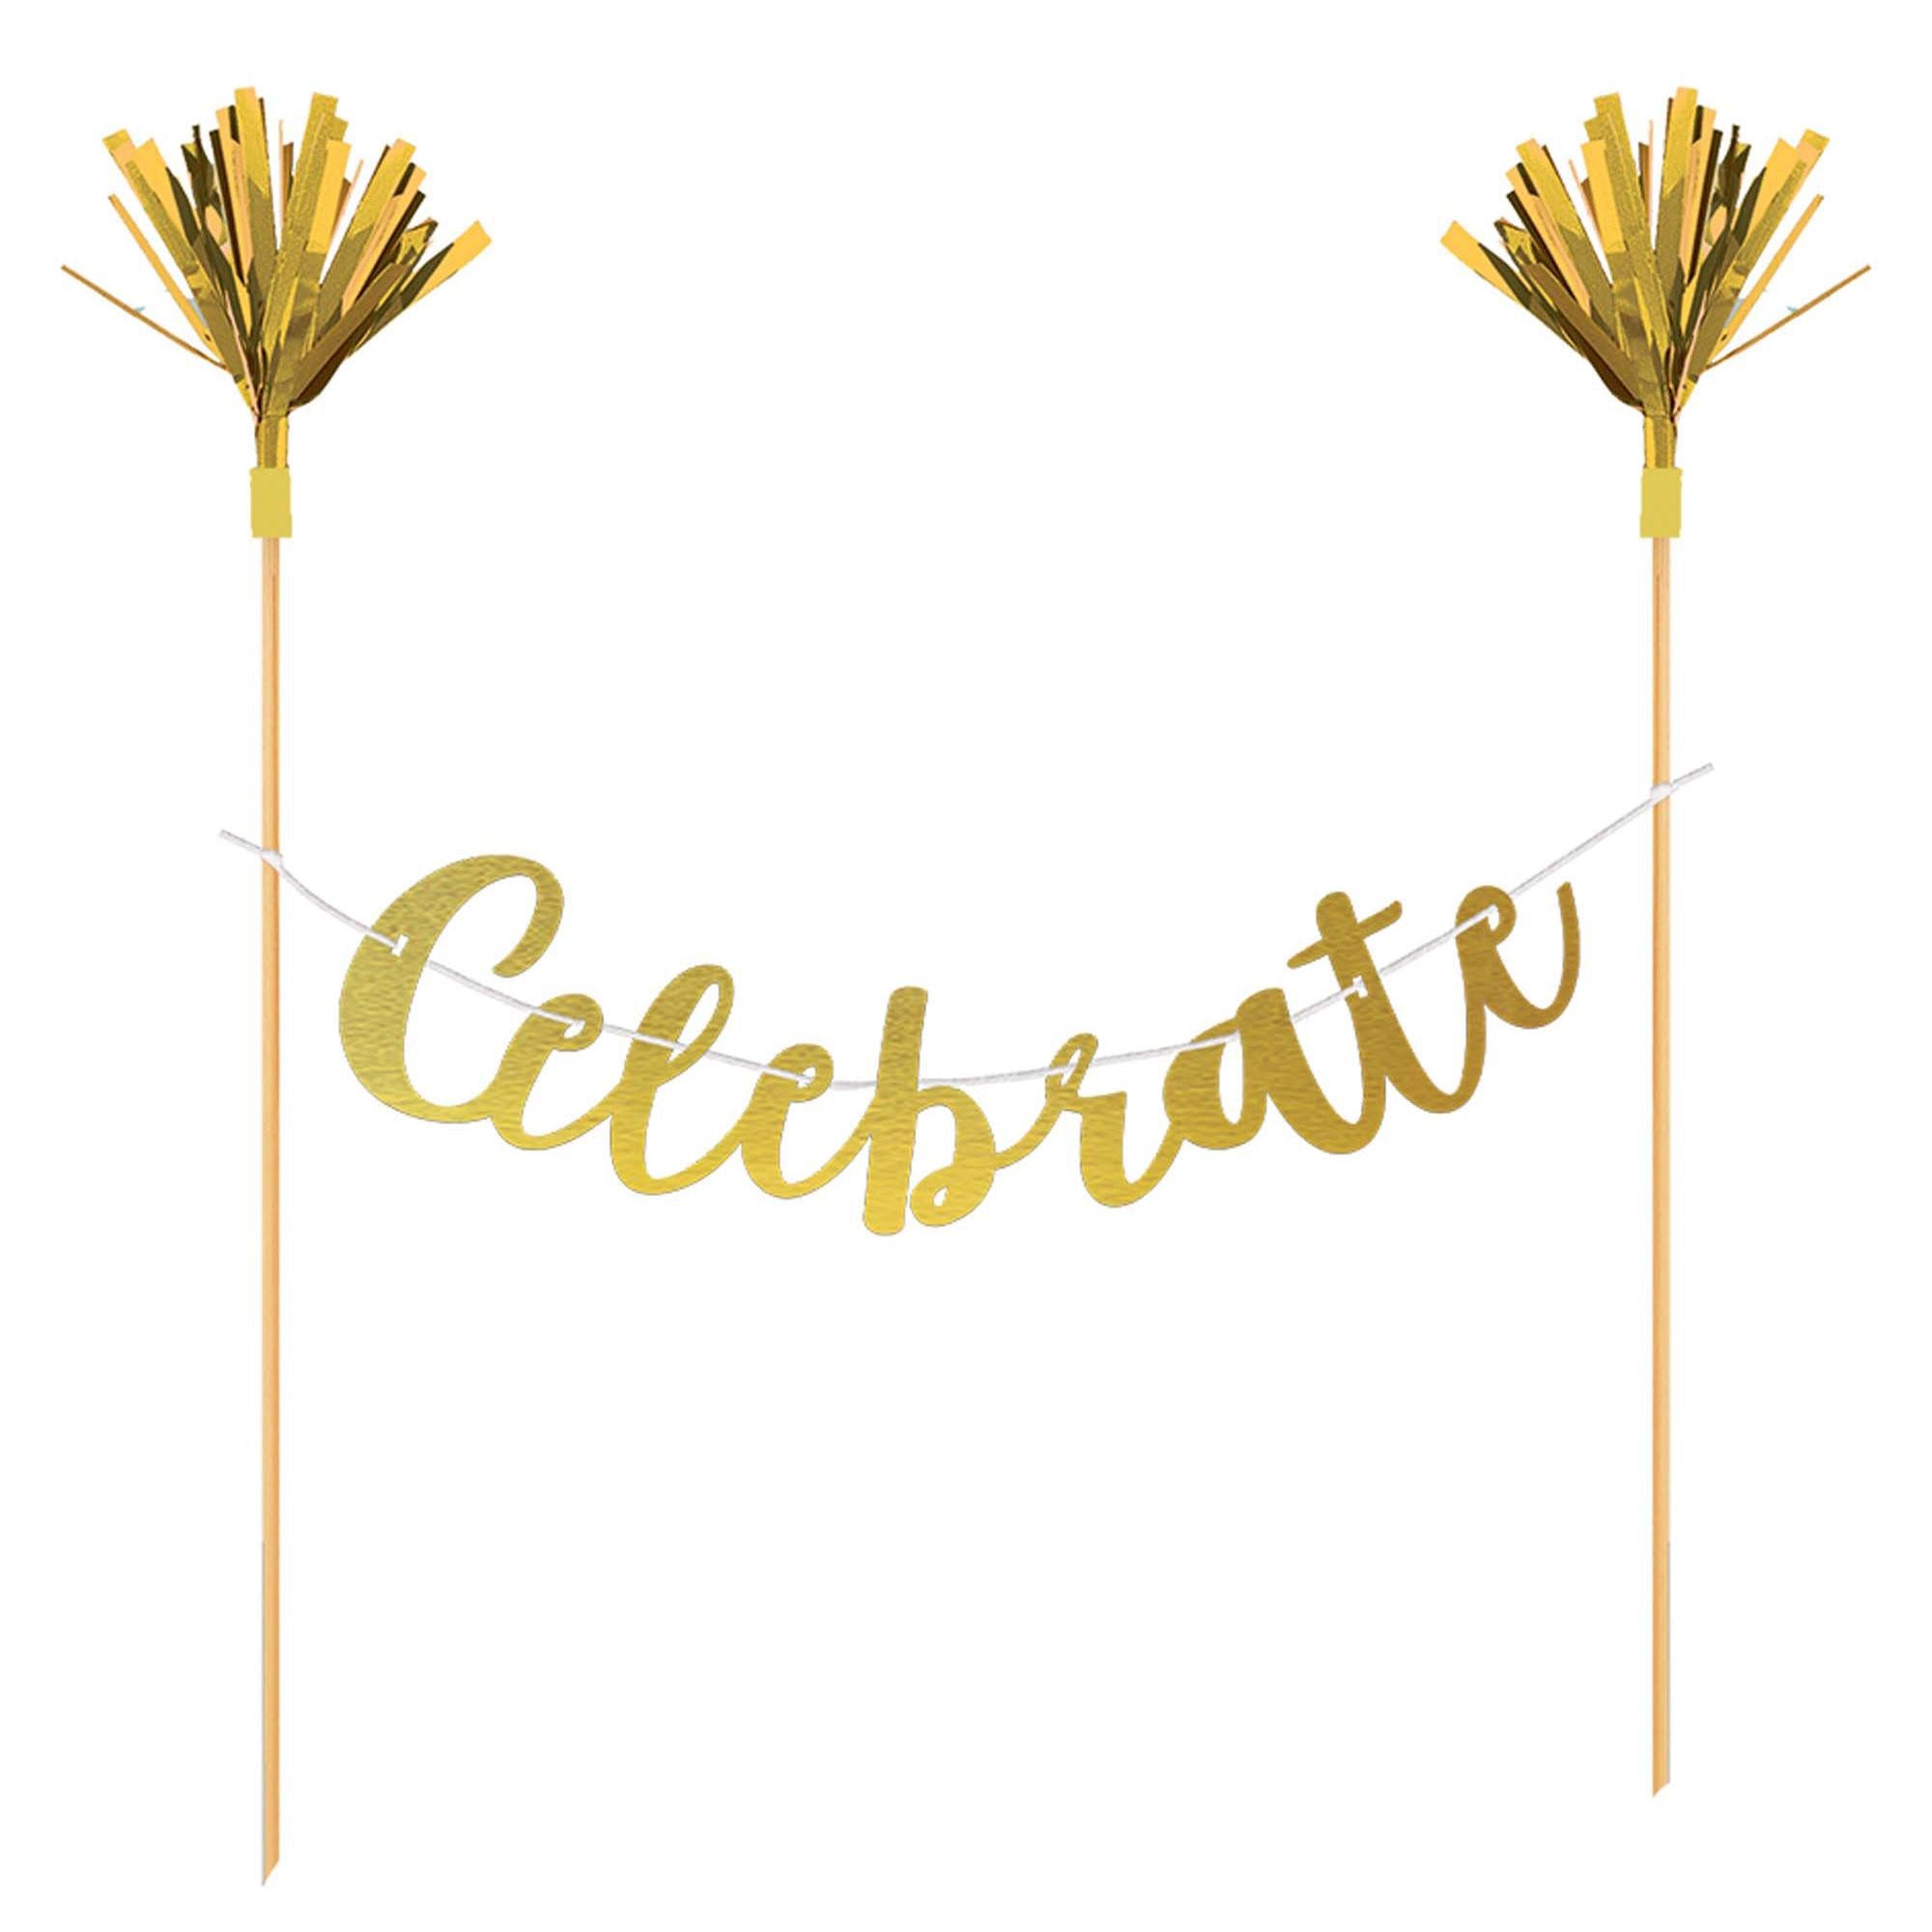 Celebrate Gold Cake Banner Party Accessories - Party Centre - Party Centre